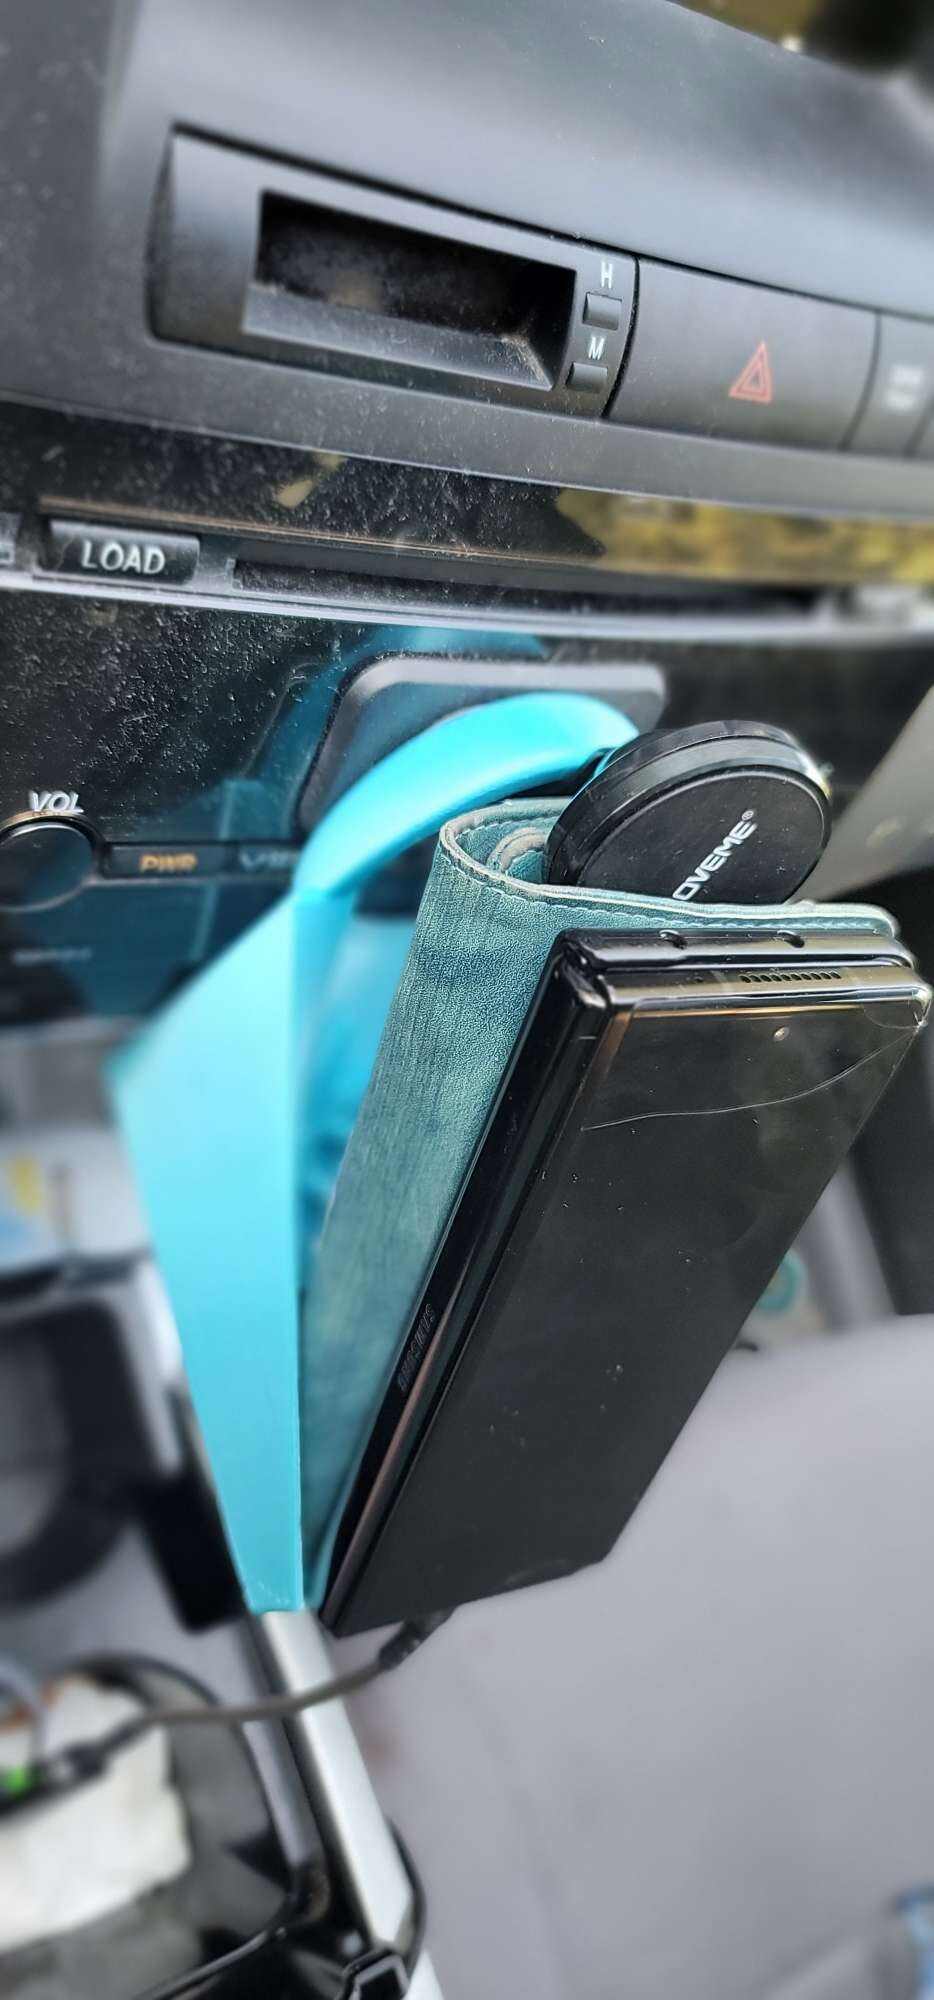 Phone stand Samsung Fold wallet case Toyota Prius